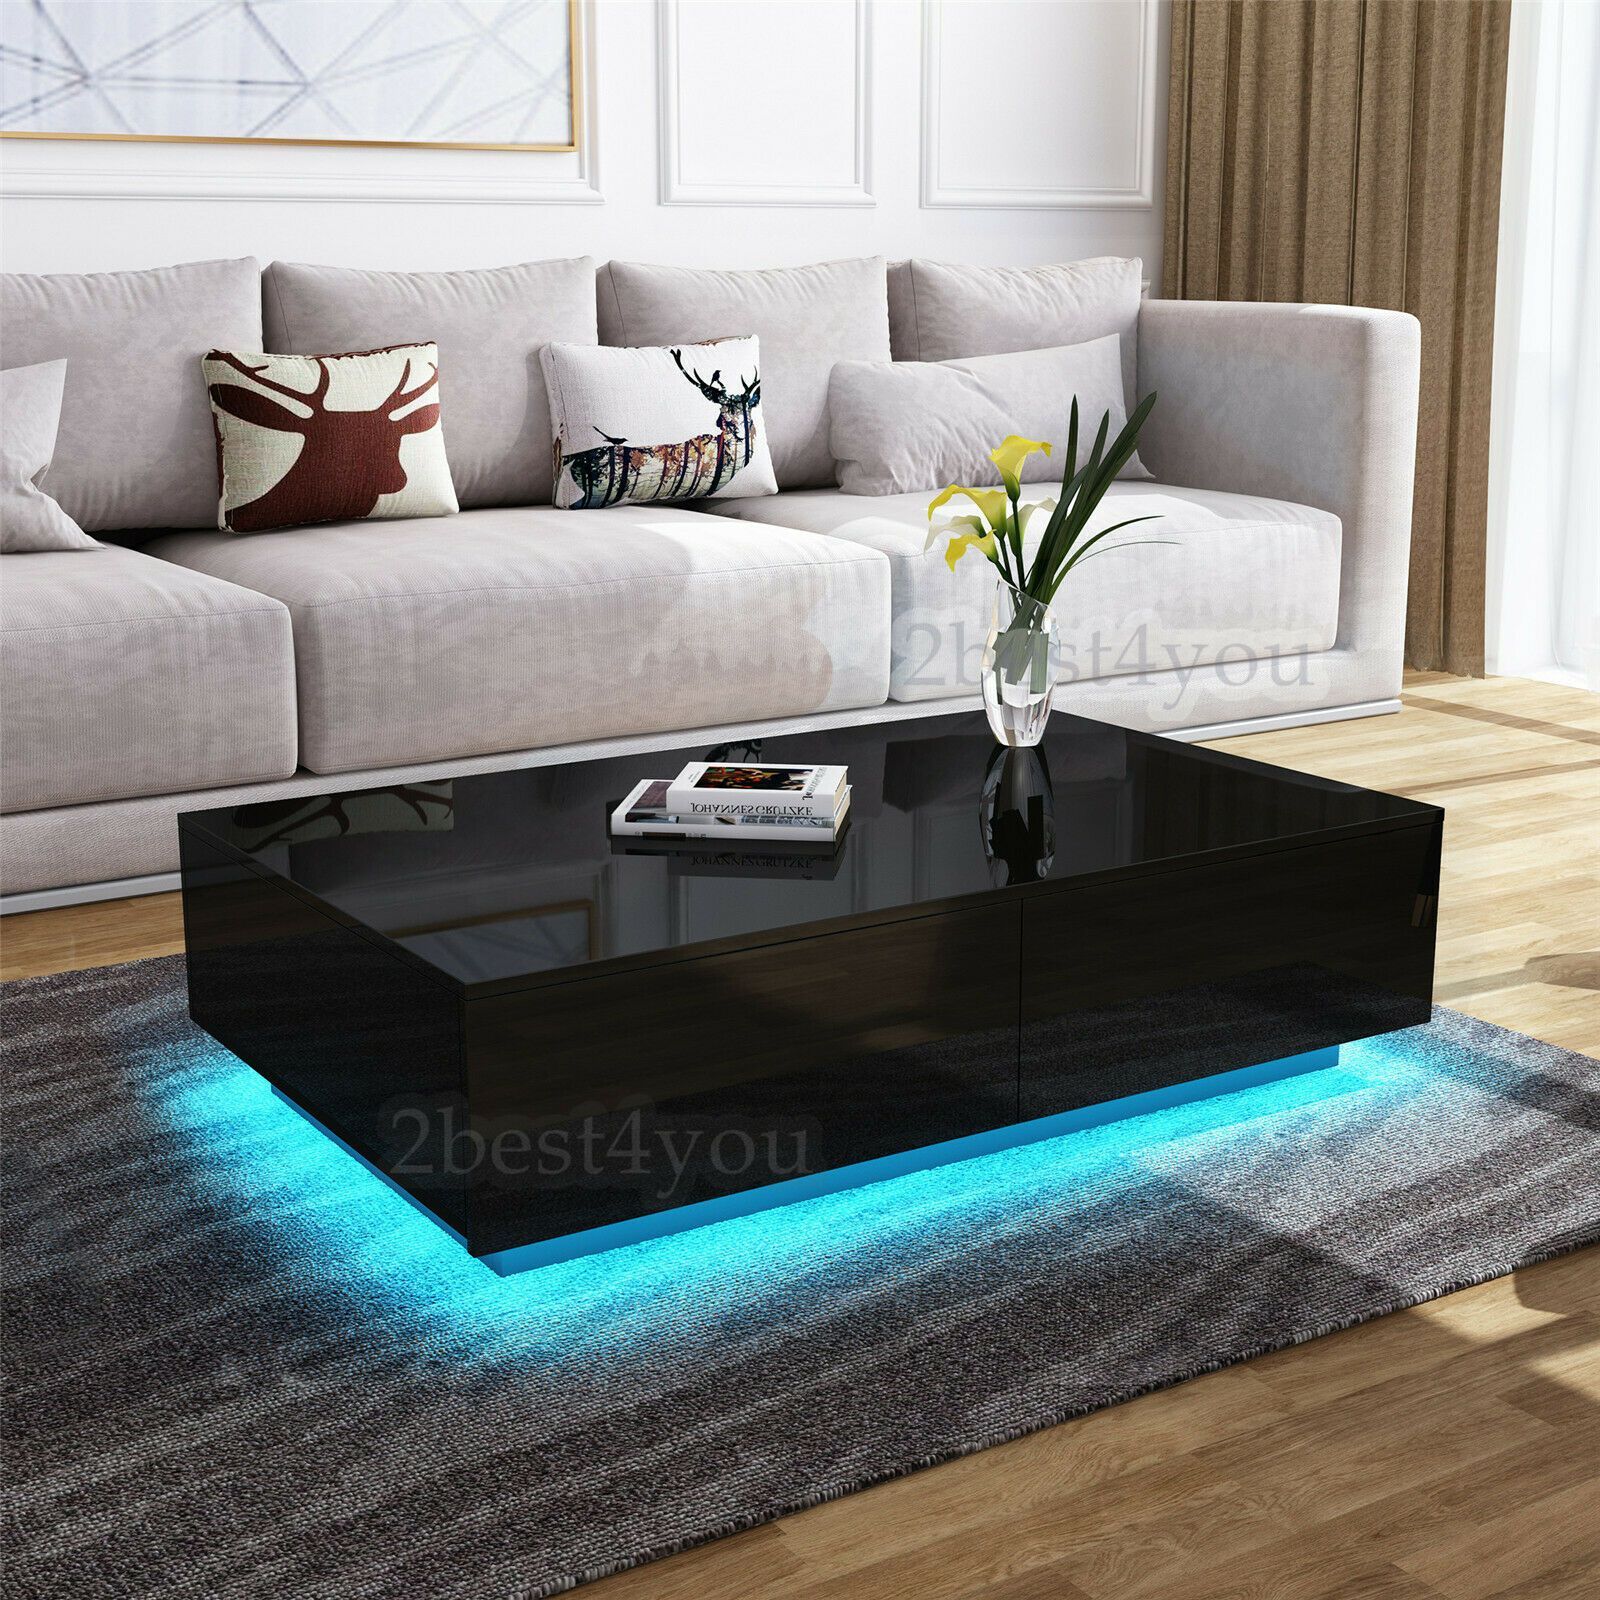 Quinton Glass Coffee Table In Black High Gloss With Led – Isle Furniture Within High Gloss Black Coffee Tables (View 19 of 20)